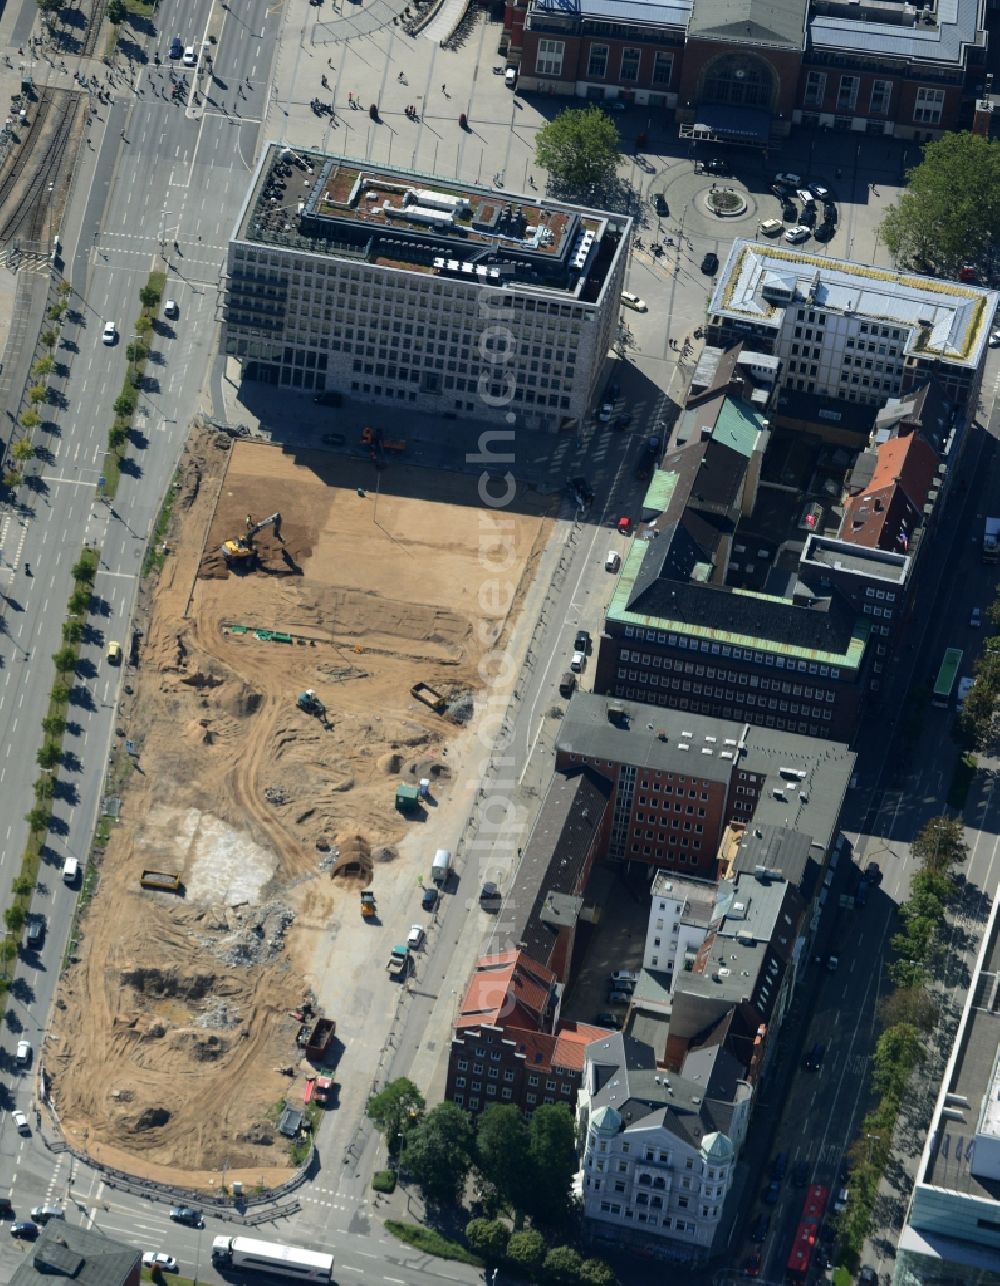 Aerial image Kiel - Construction site for the new building of the Central Omnibus Station ZOB in Kiel in the state of Schleswig-Holstein. The construction site is located on Schwedenkai. The new bus station and a parking lot is being built